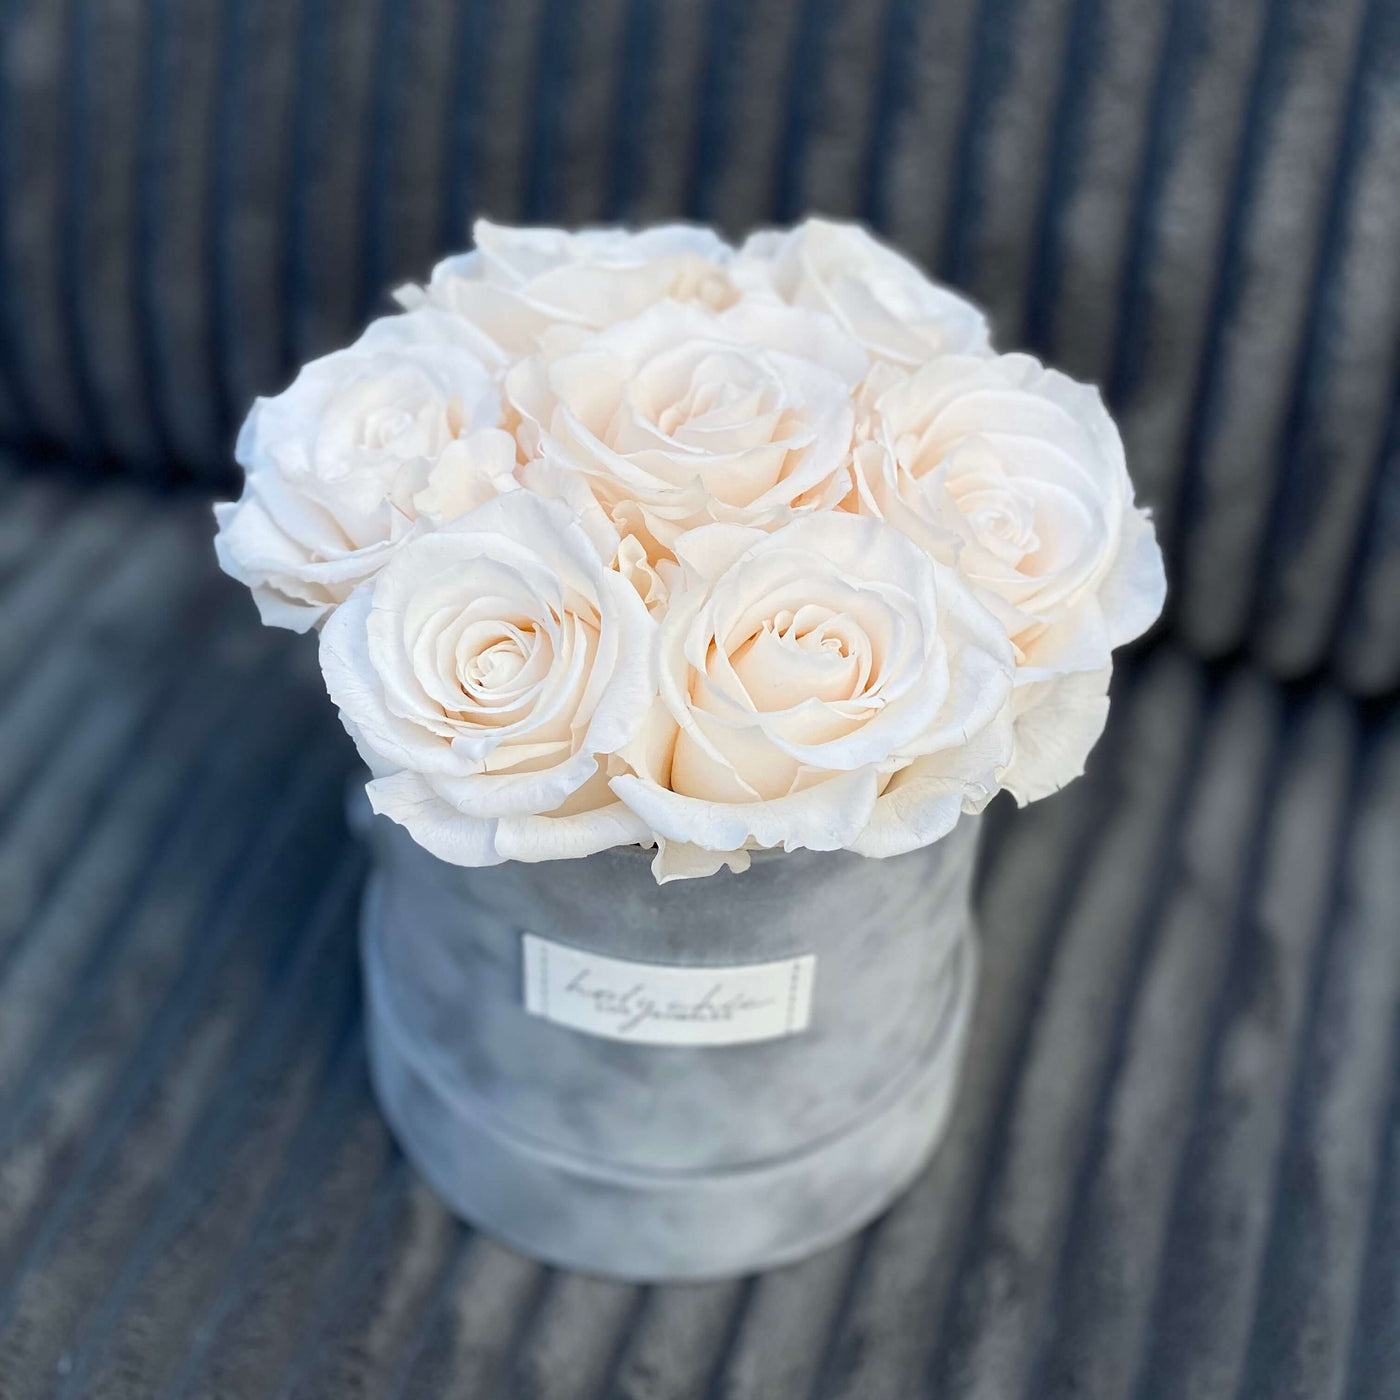 Forever roses in a small suede round box